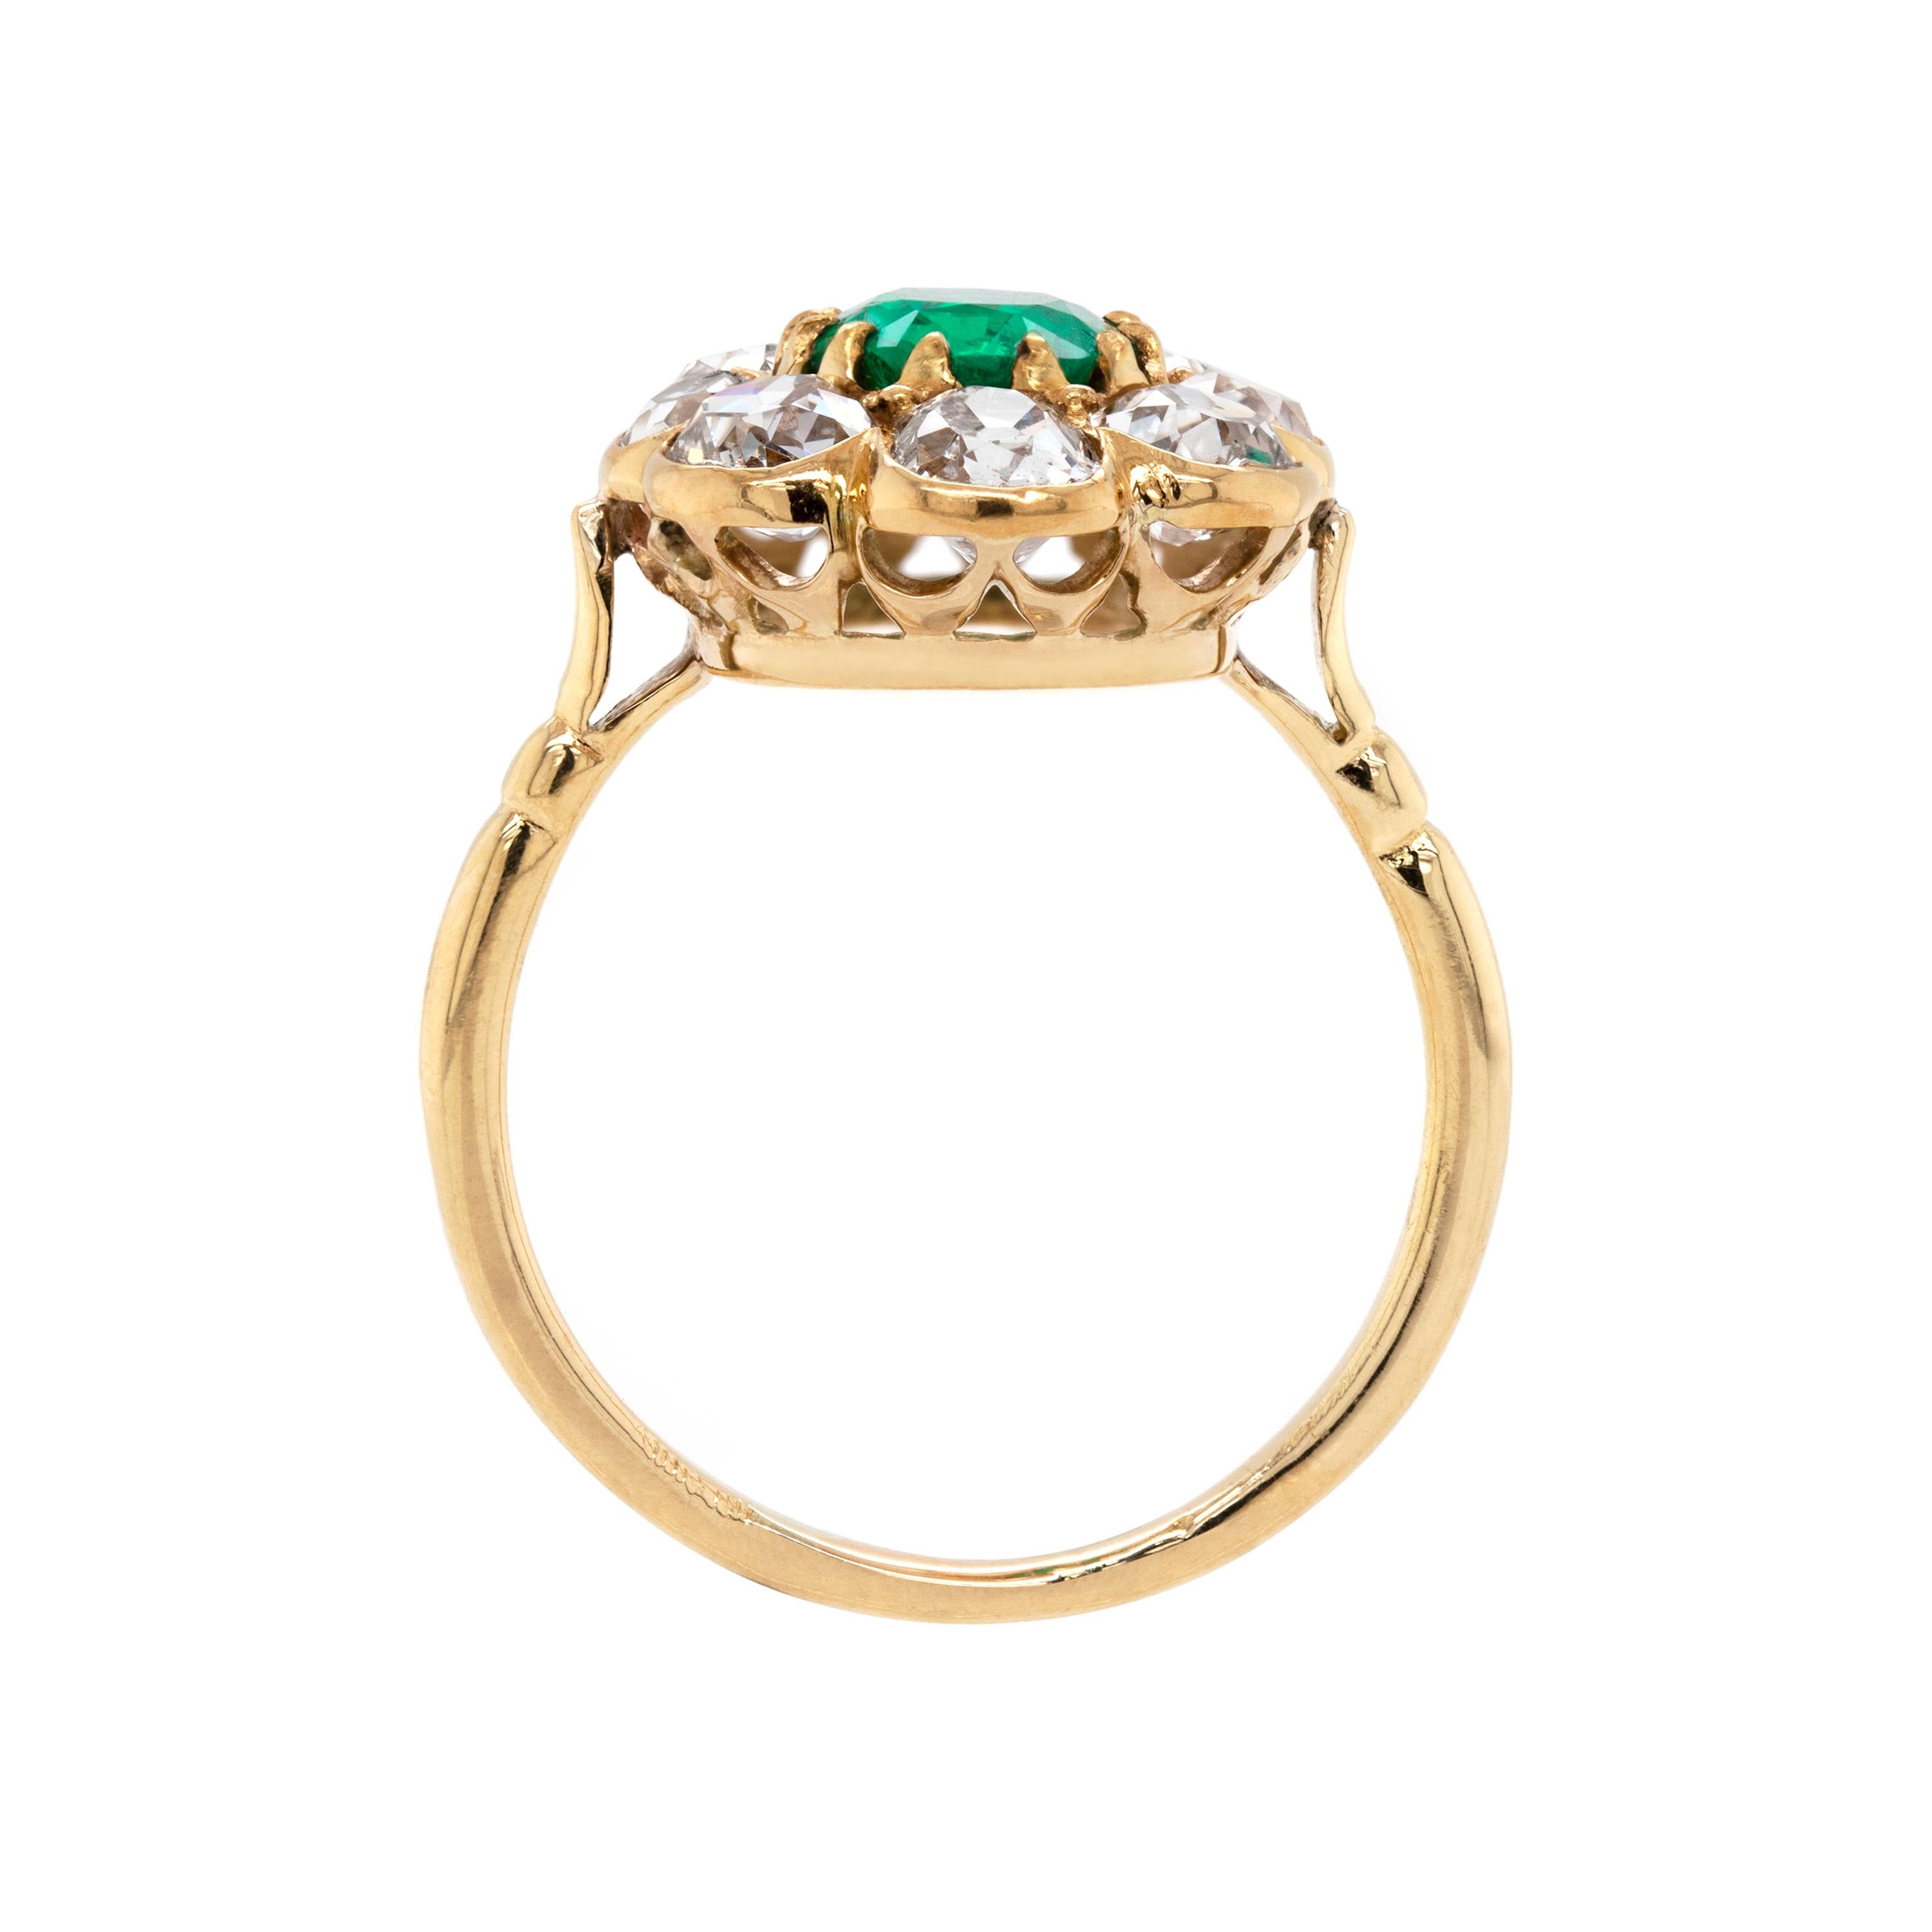 Old Mine Cut Late Victorian Emerald and Old Cut Diamond 18ct Gold Cluster Ring, Circa 1890